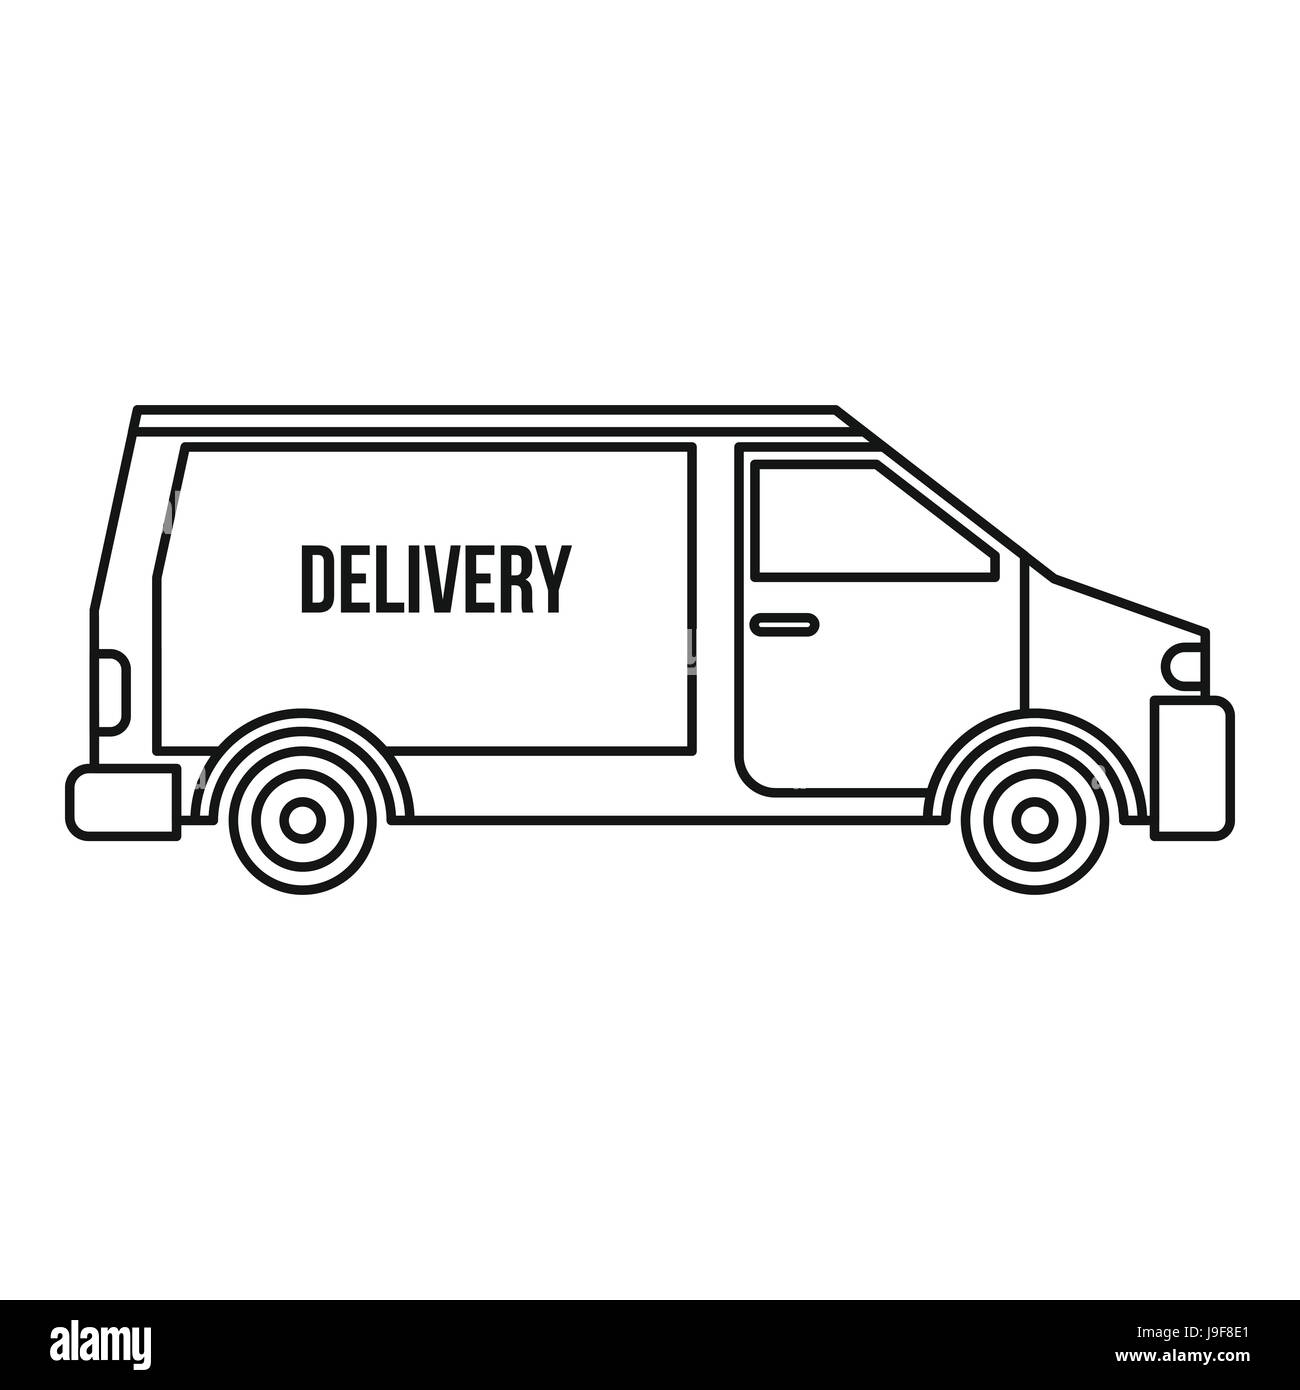 Premium Vector  Delivery truck hand drawn outline doodle icon fast  delivery service fast shipping and freight concept